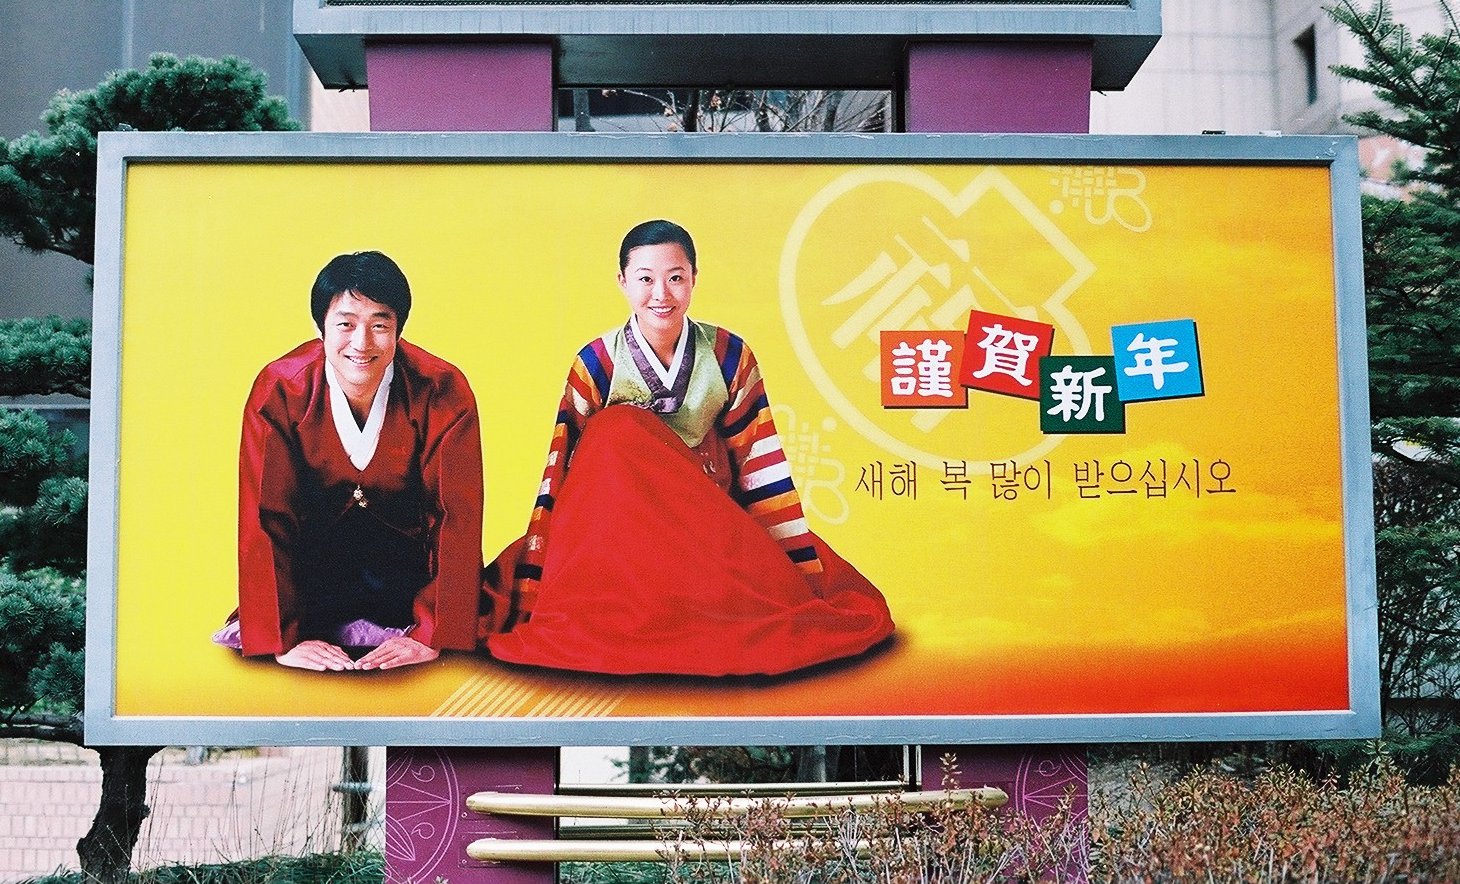 a billboard is shown advertising an asian film